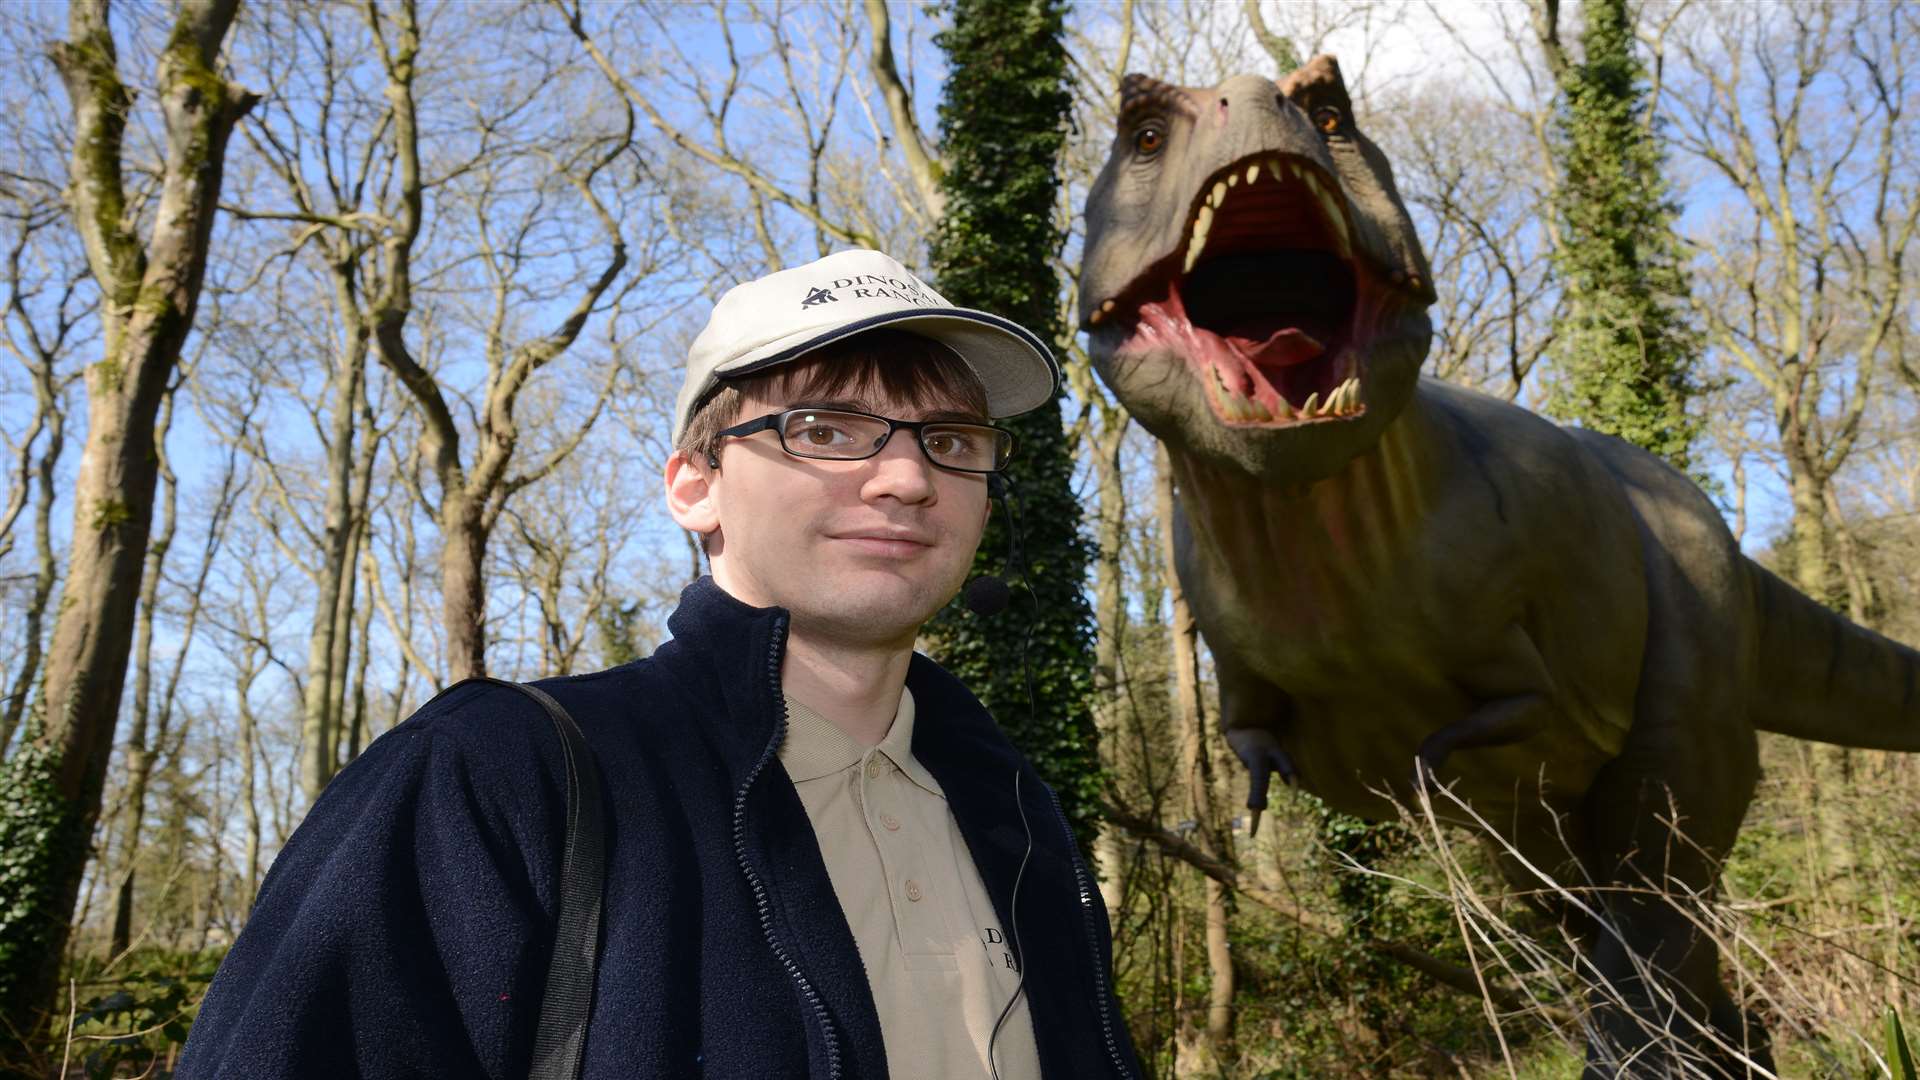 Rangers are on hand to guide visitors through Dinosaur Forest